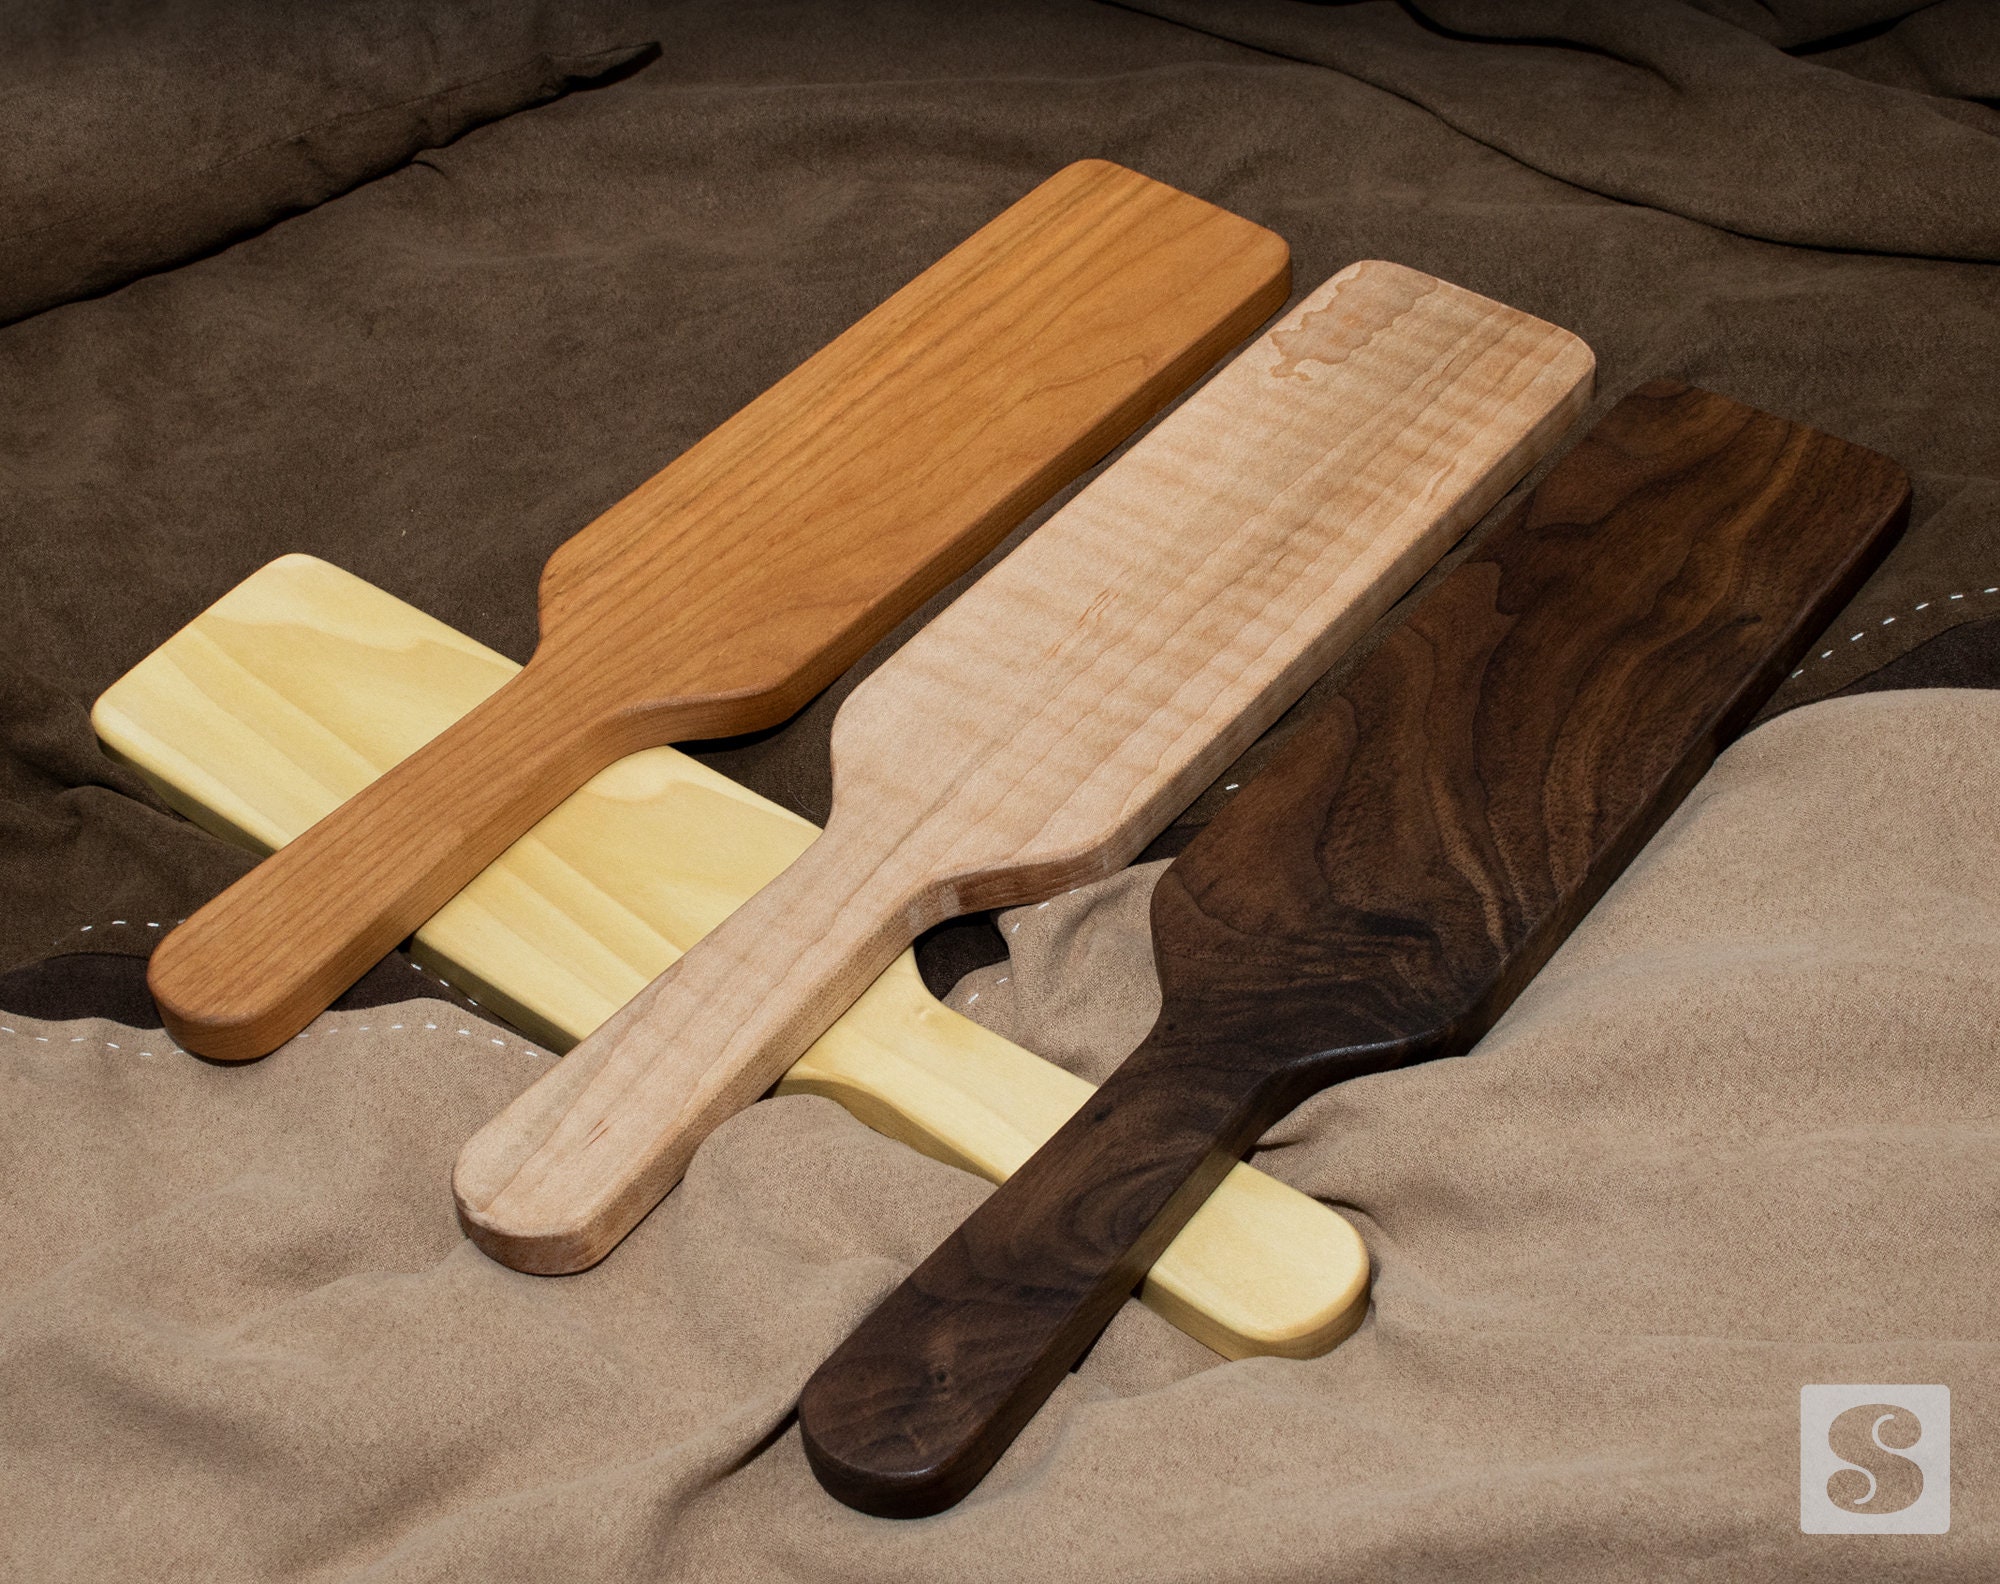 Hand Mirror Spanking Paddle, Wooden Spanking Paddle, Impact BDSM Paddl –  Toasty Contraptions